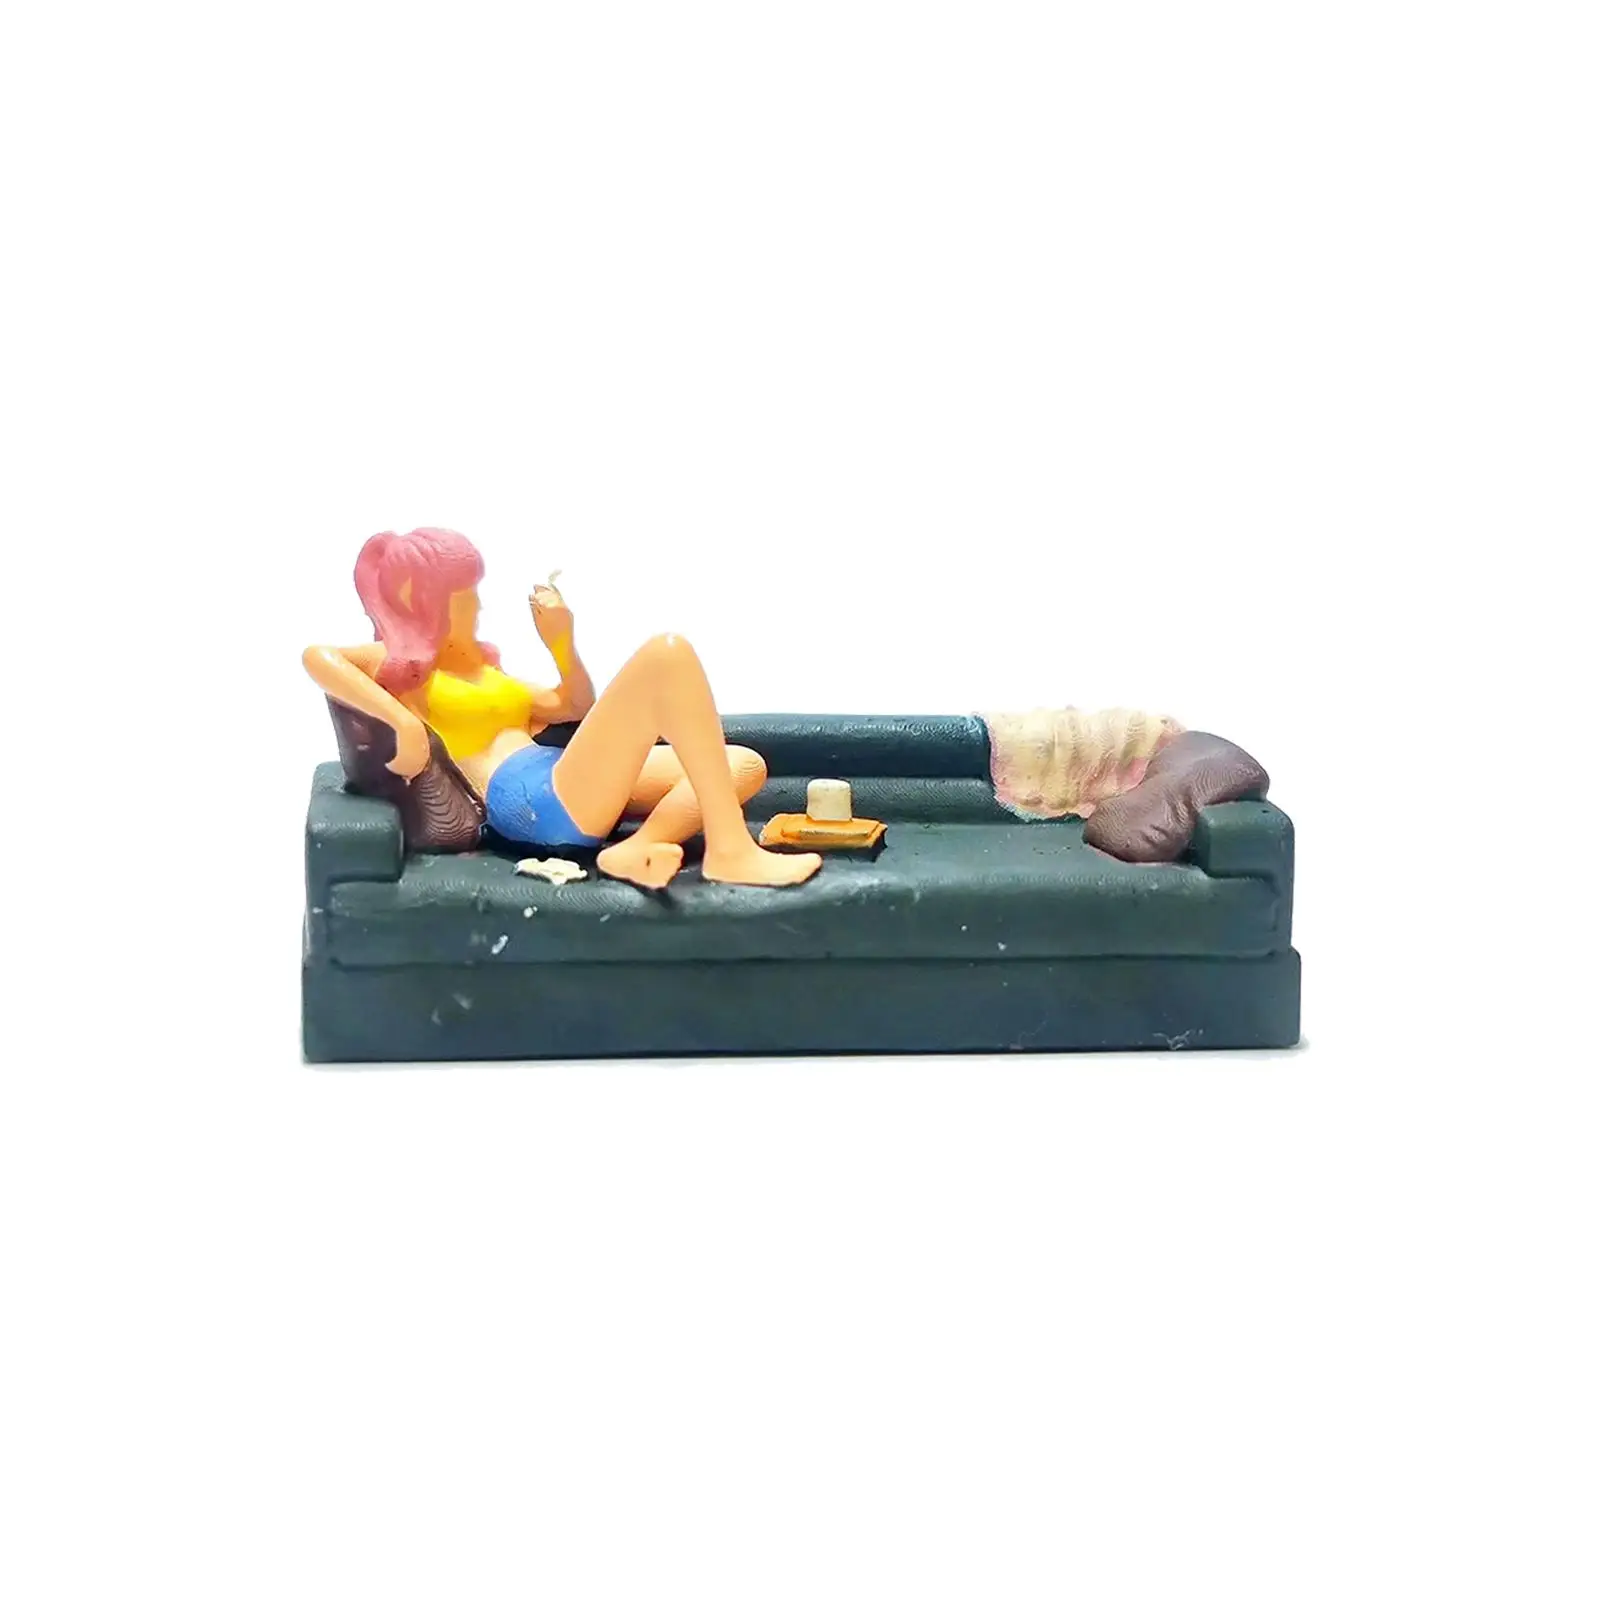 1/64 Scale Figure  on The Couch Character  for Dioramas Collections Garden